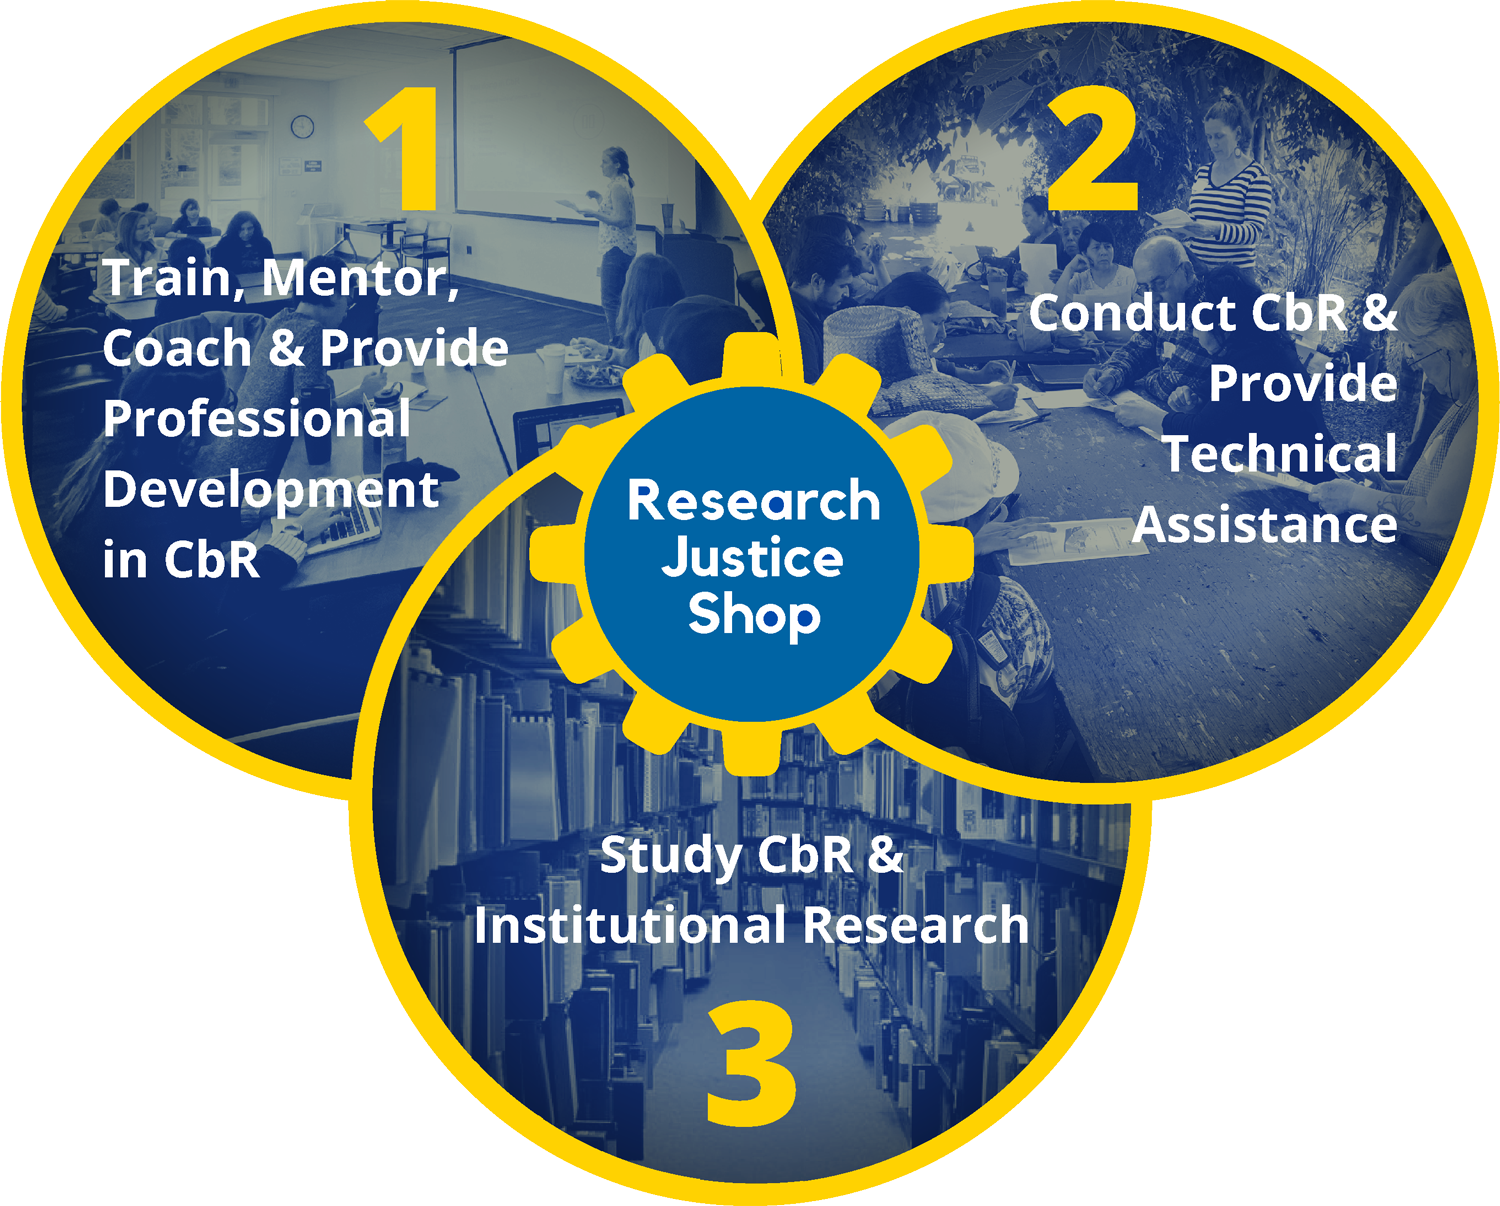 Welcome to the Research Justice Shop!                             by Connie McGuire & Victoria Lowerson Bredow